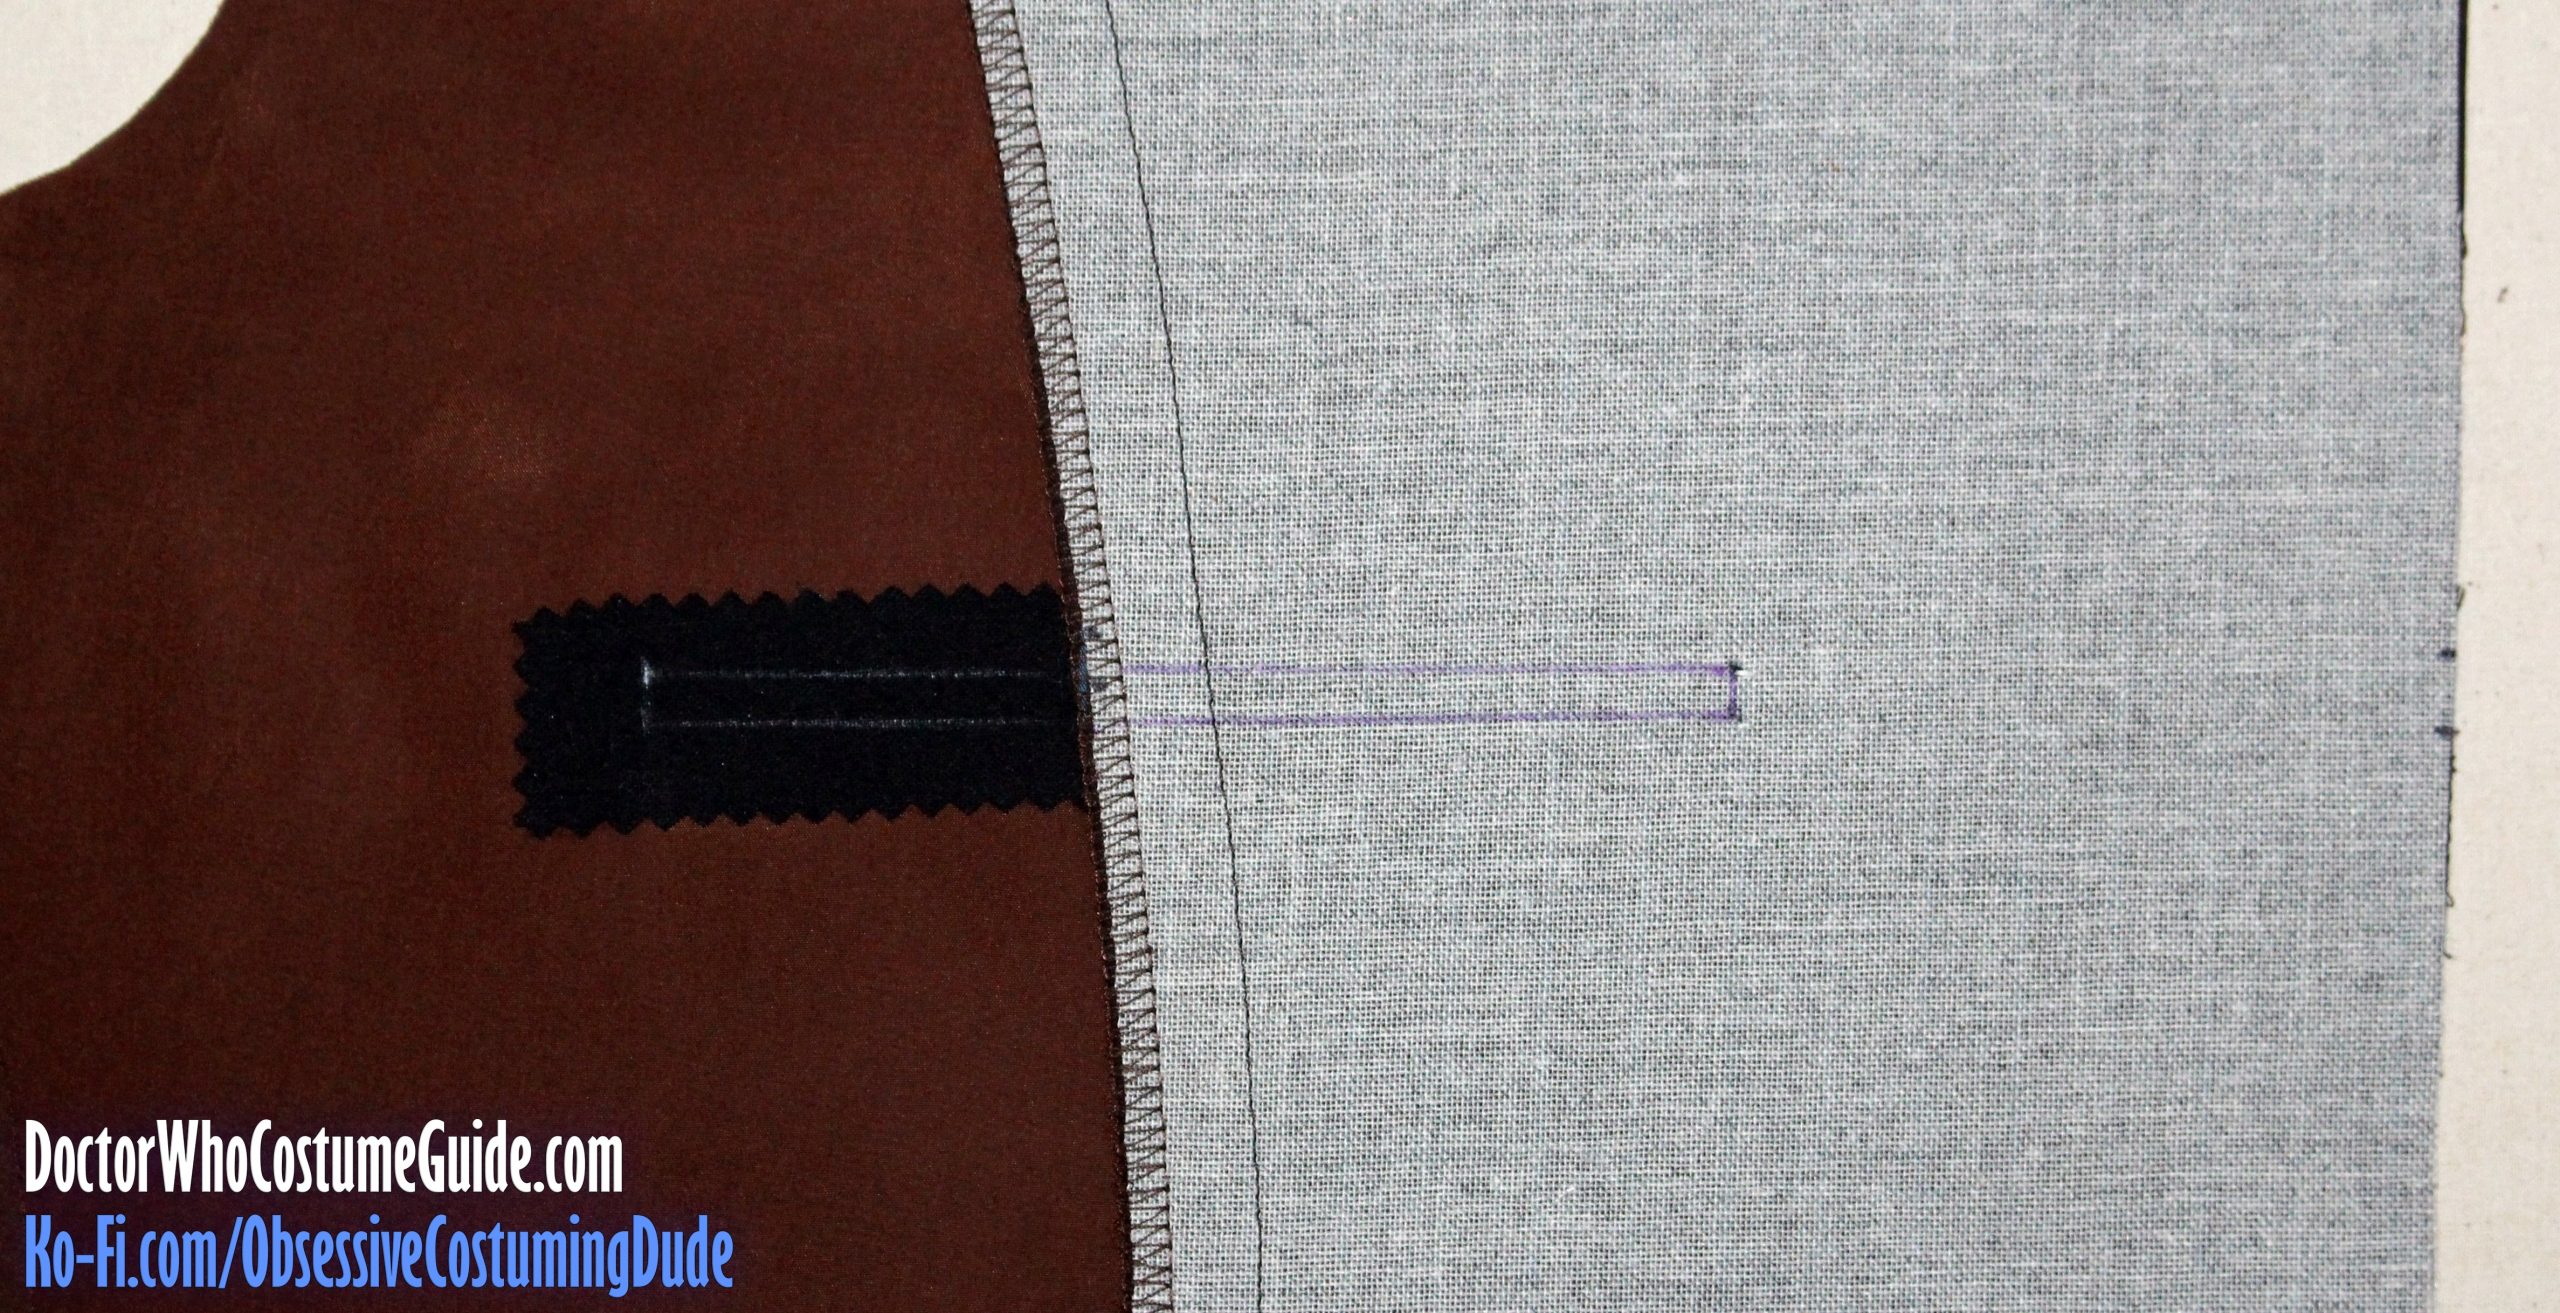 10th Doctor brown suit sewing tutorial - Doctor Who Costume Guide